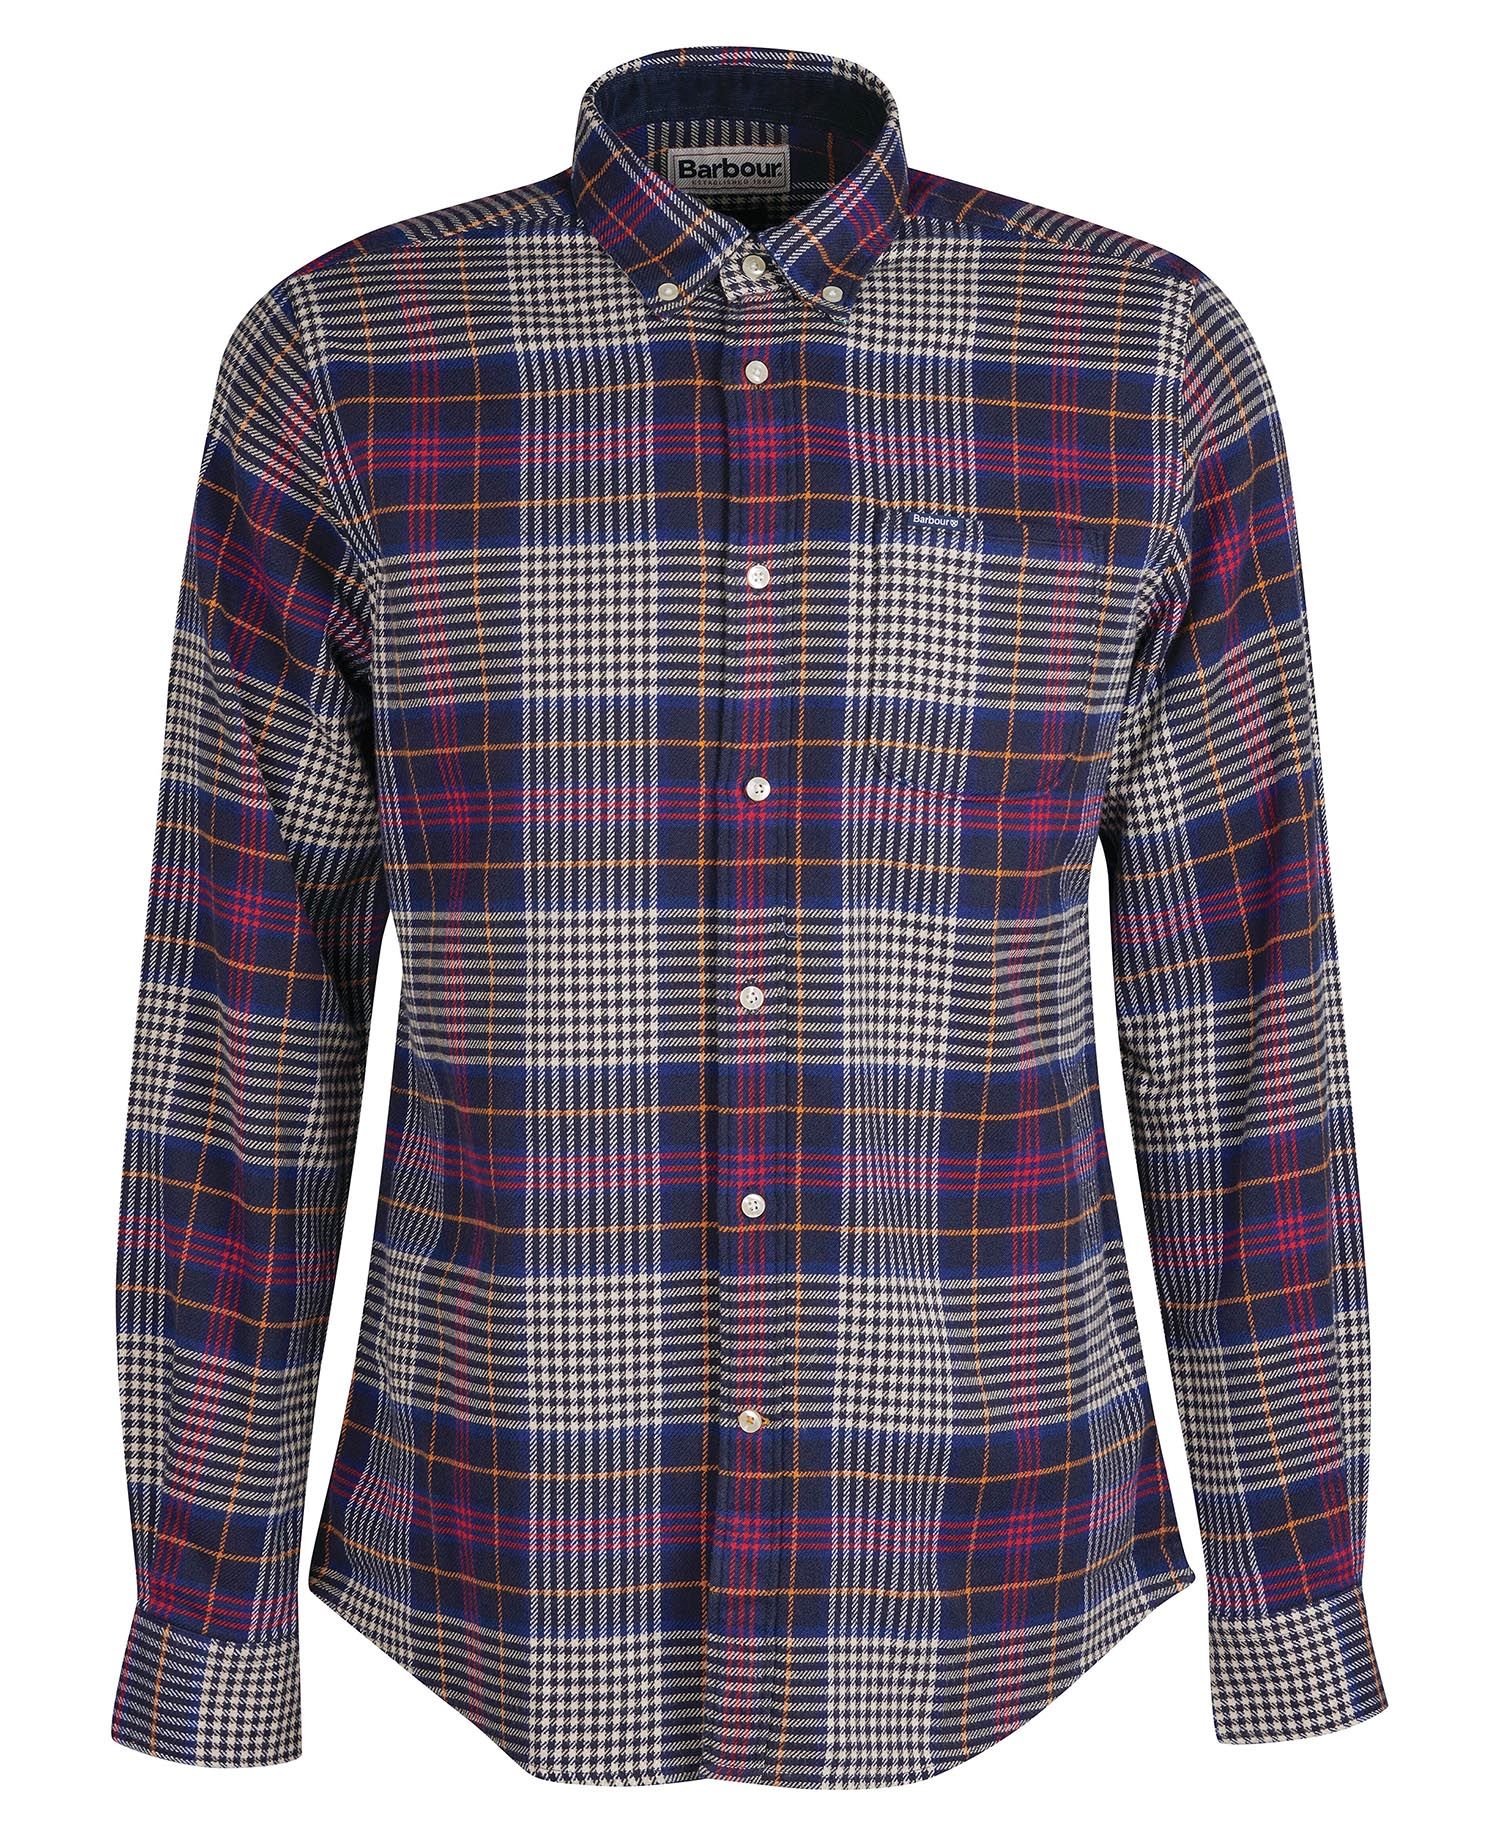 Barbour Jackson Tailored Fit Shirt